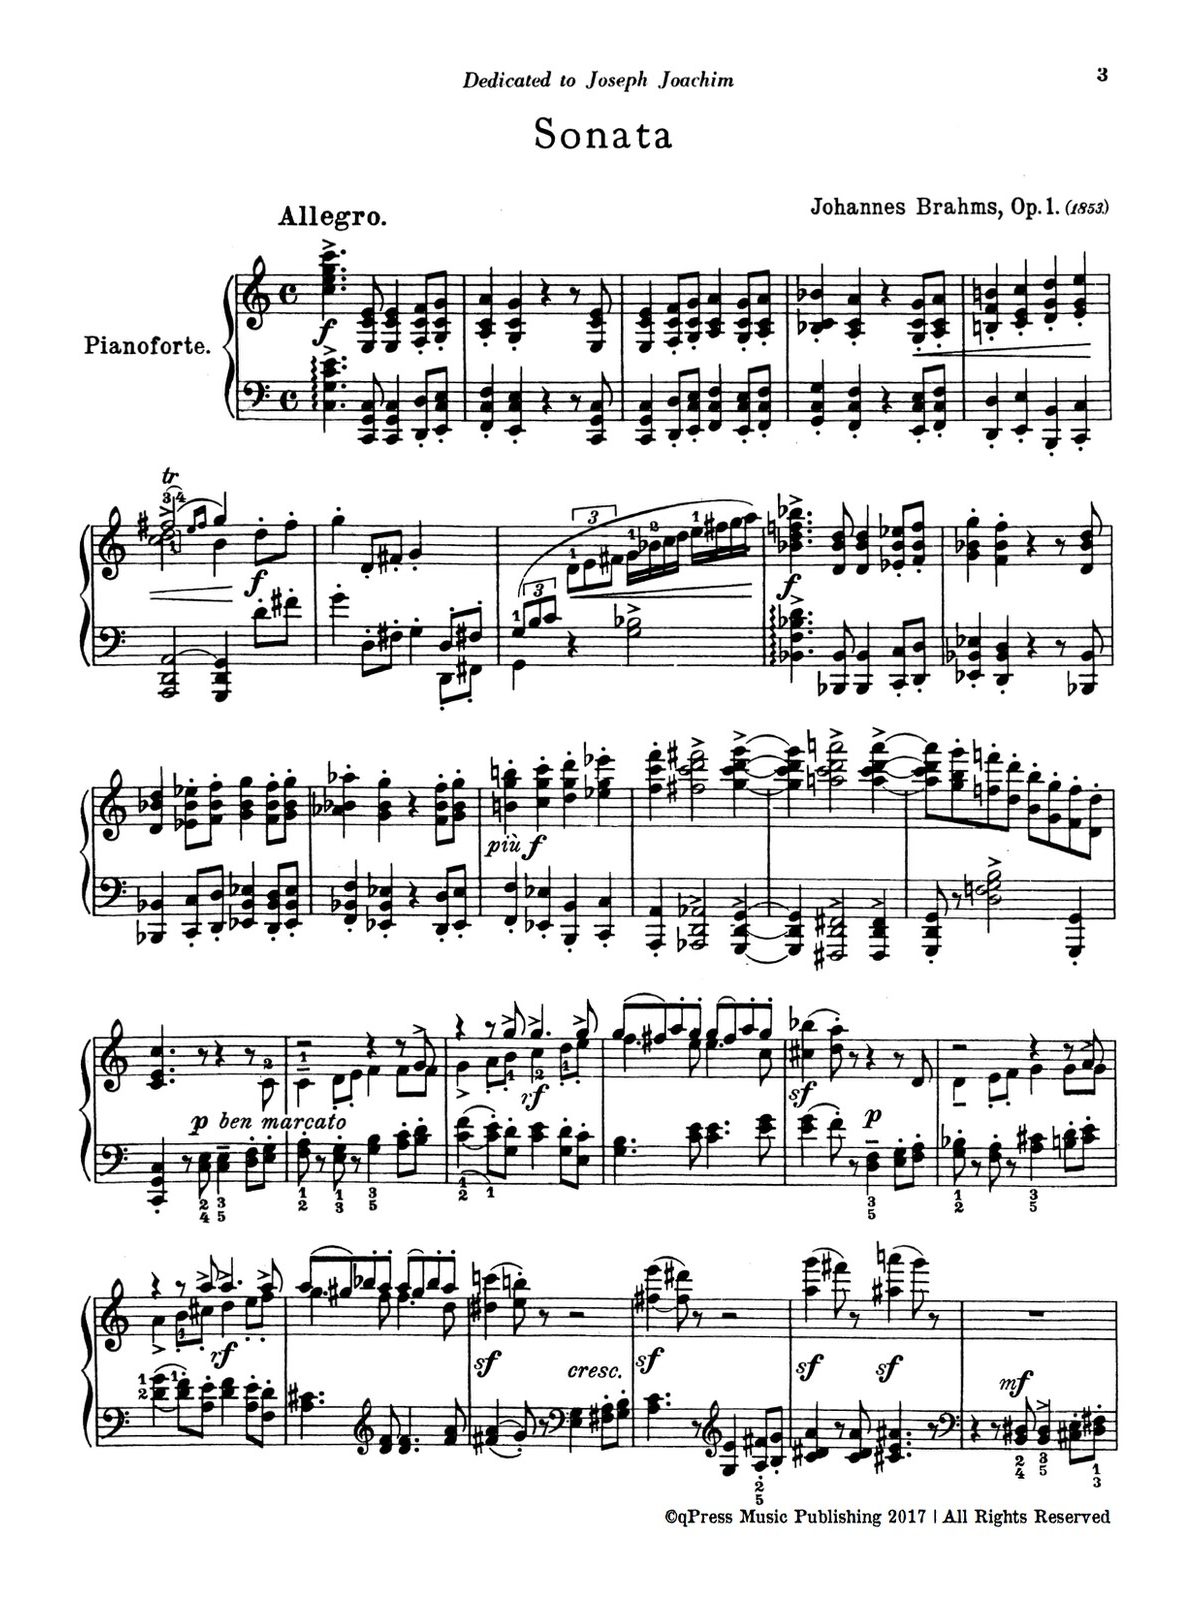 Brahms, Works for Piano Vol.1-p003